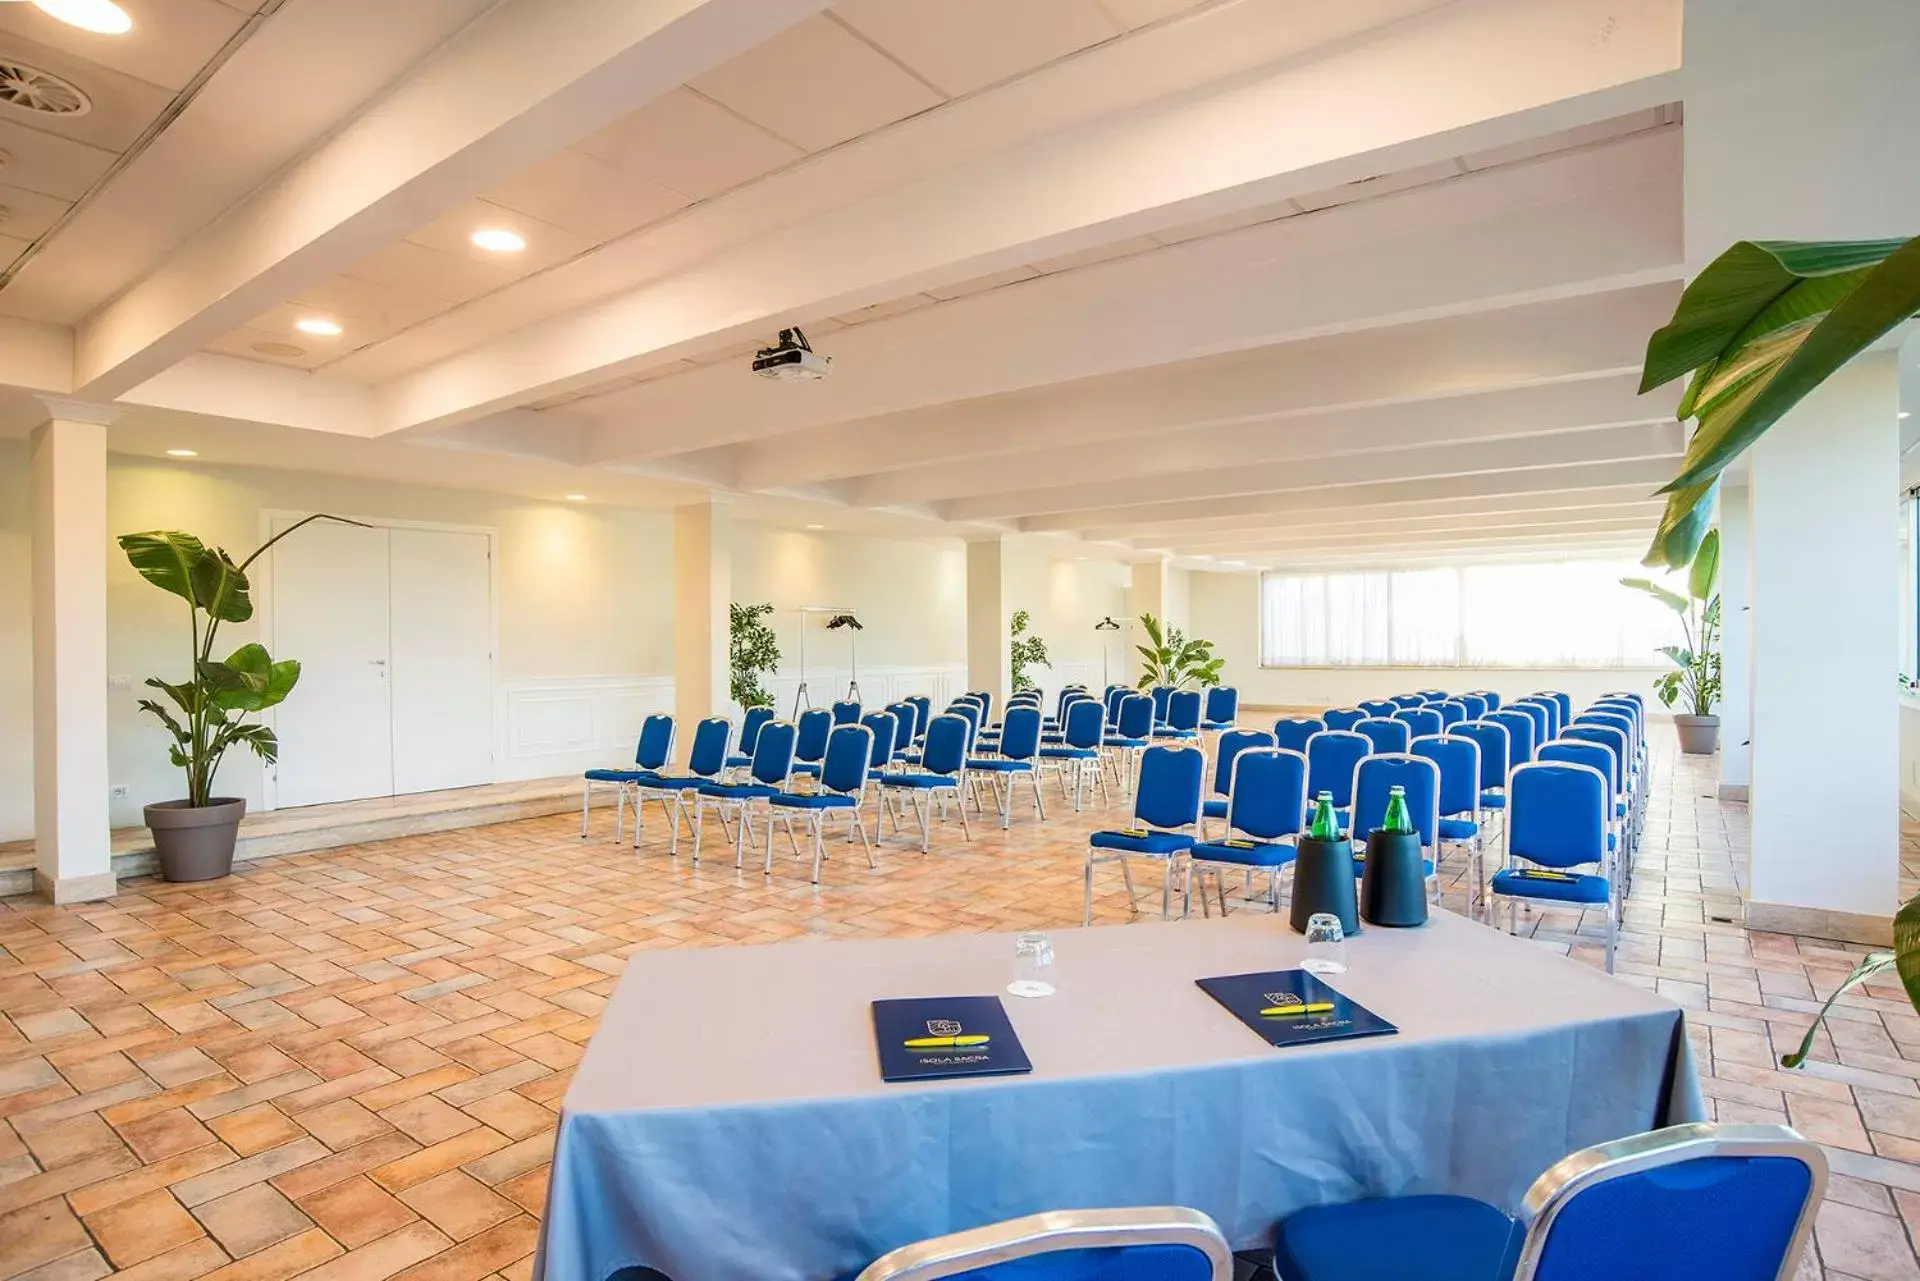 Meeting/conference room, Banquet Facilities in Hotel Isola Sacra Rome Airport